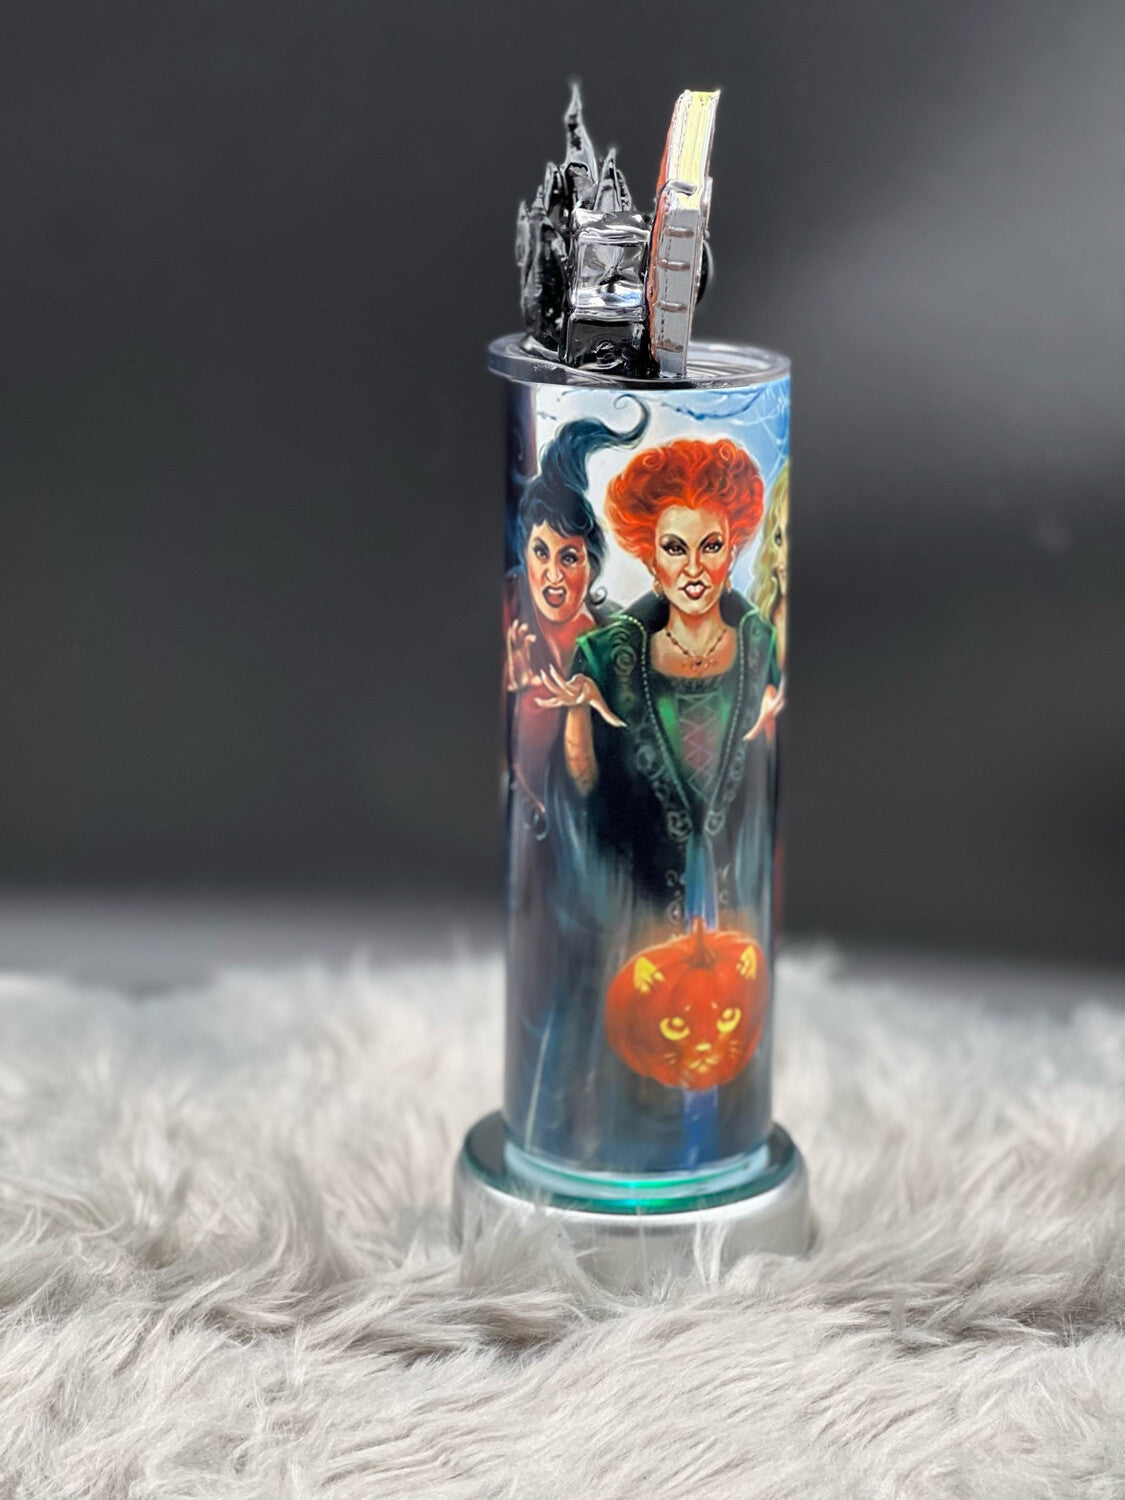 20oz Sanderson Sisters Stainless Steel Tumbler With Custom Lid. Includes Spell Book and Black Flame Attached to Lid Plus a Straw Charm.